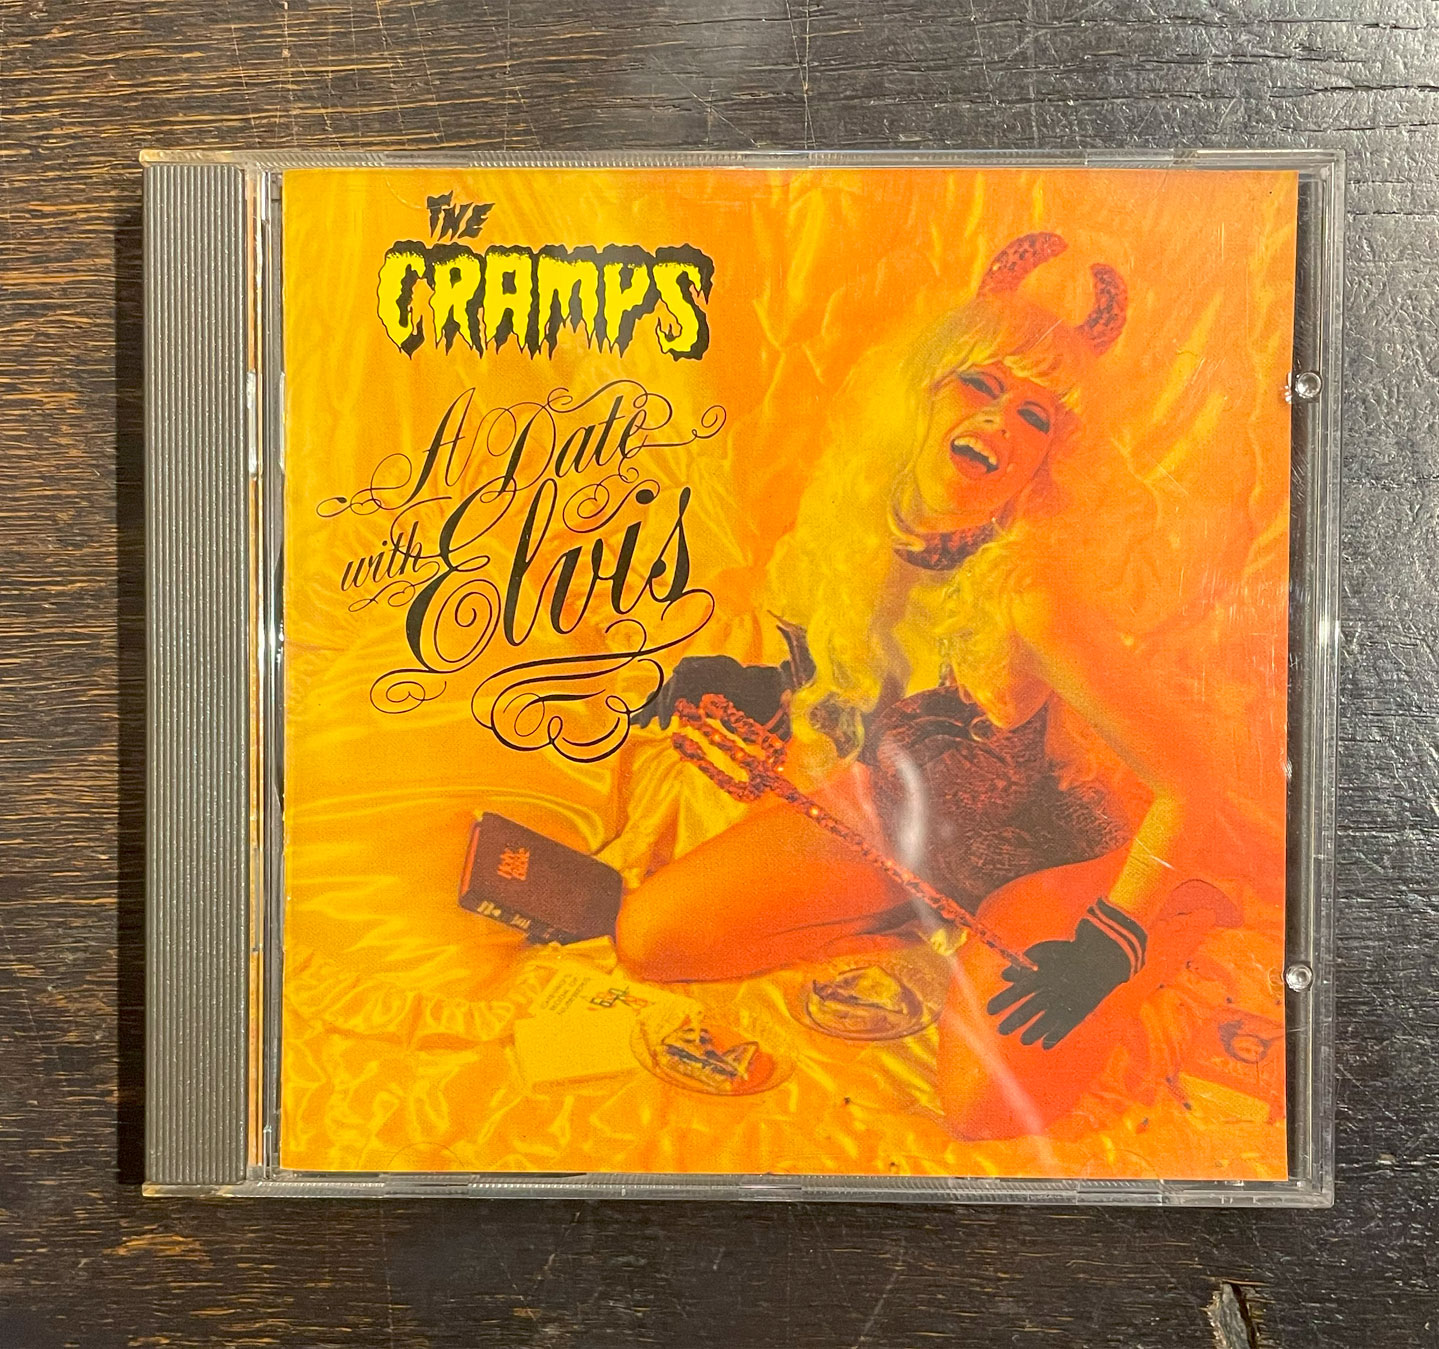 USED! CRAMPS CD A Date With Elvis